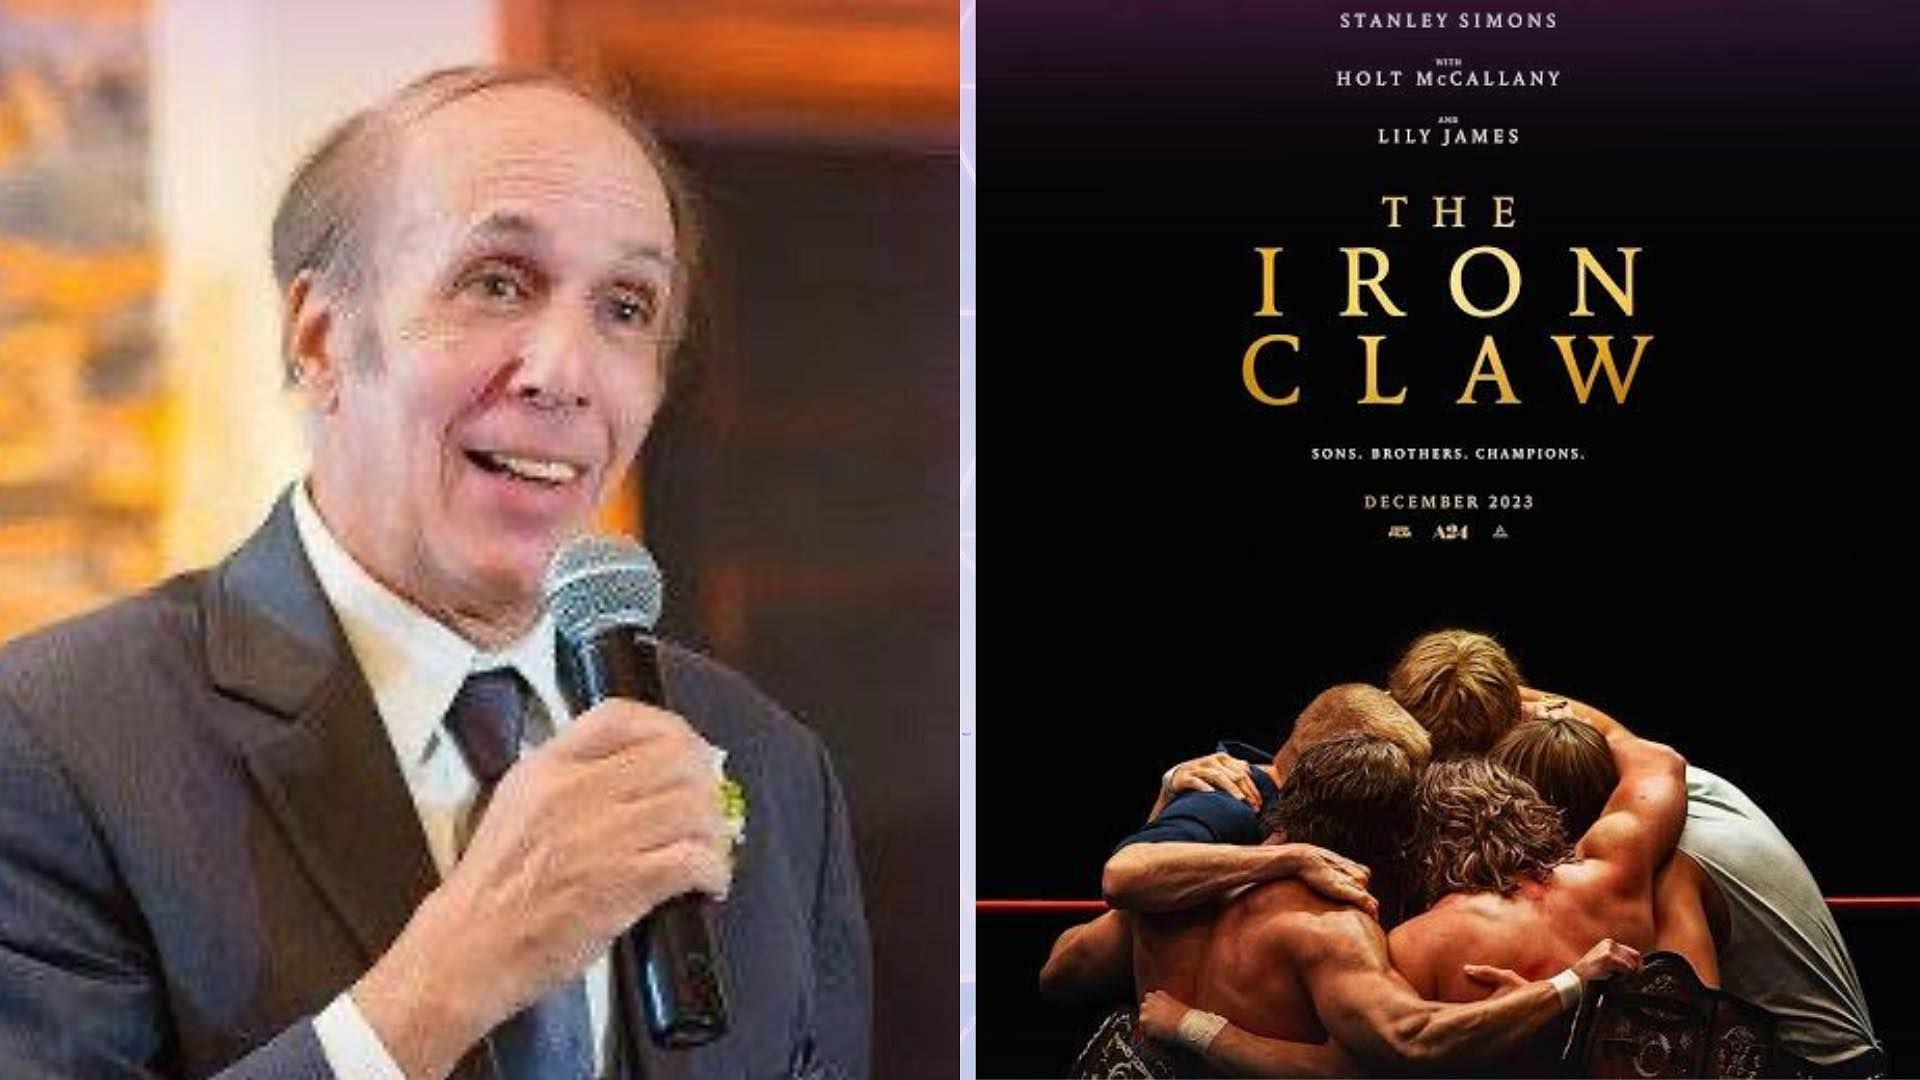 Bill Apter had some interesting things to say about The Iron Claw movie